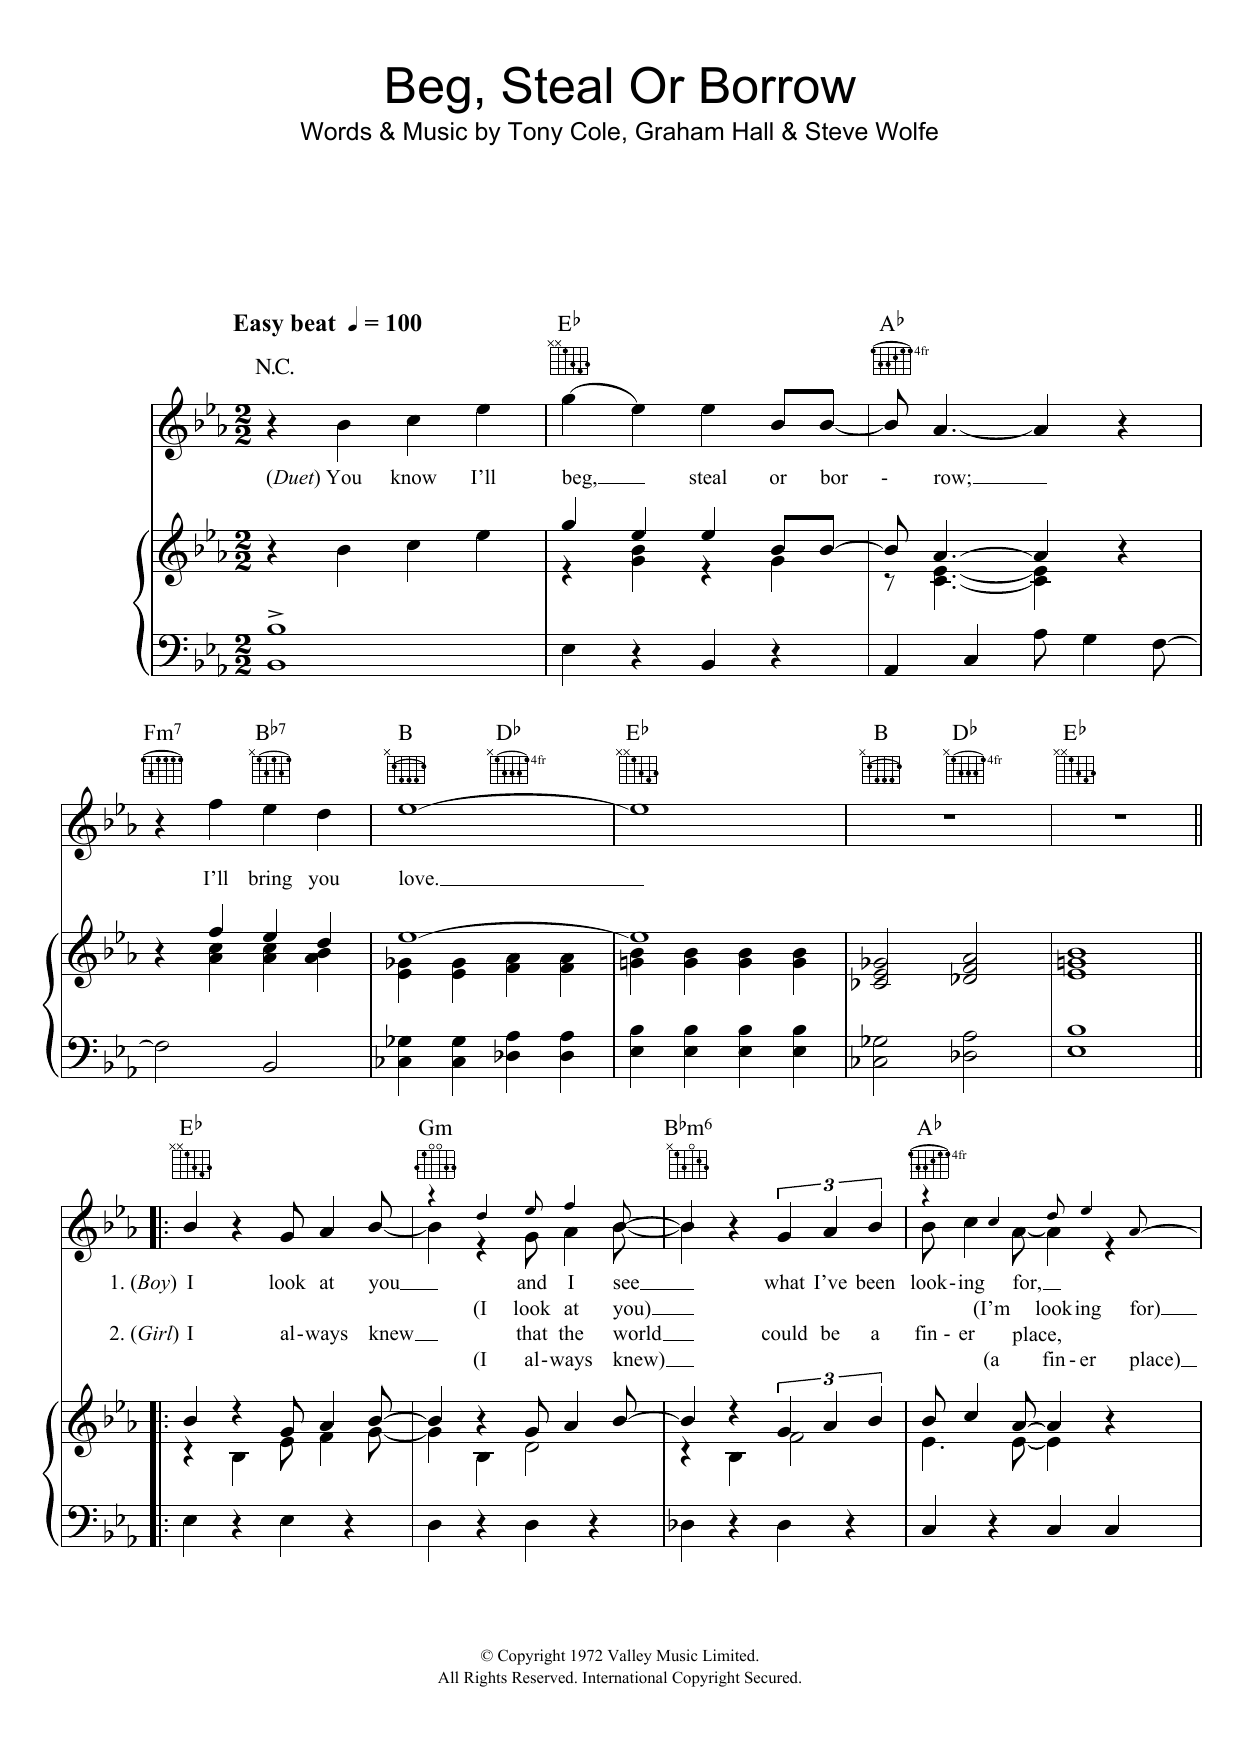 Download The New Seekers Beg, Steal Or Borrow Sheet Music